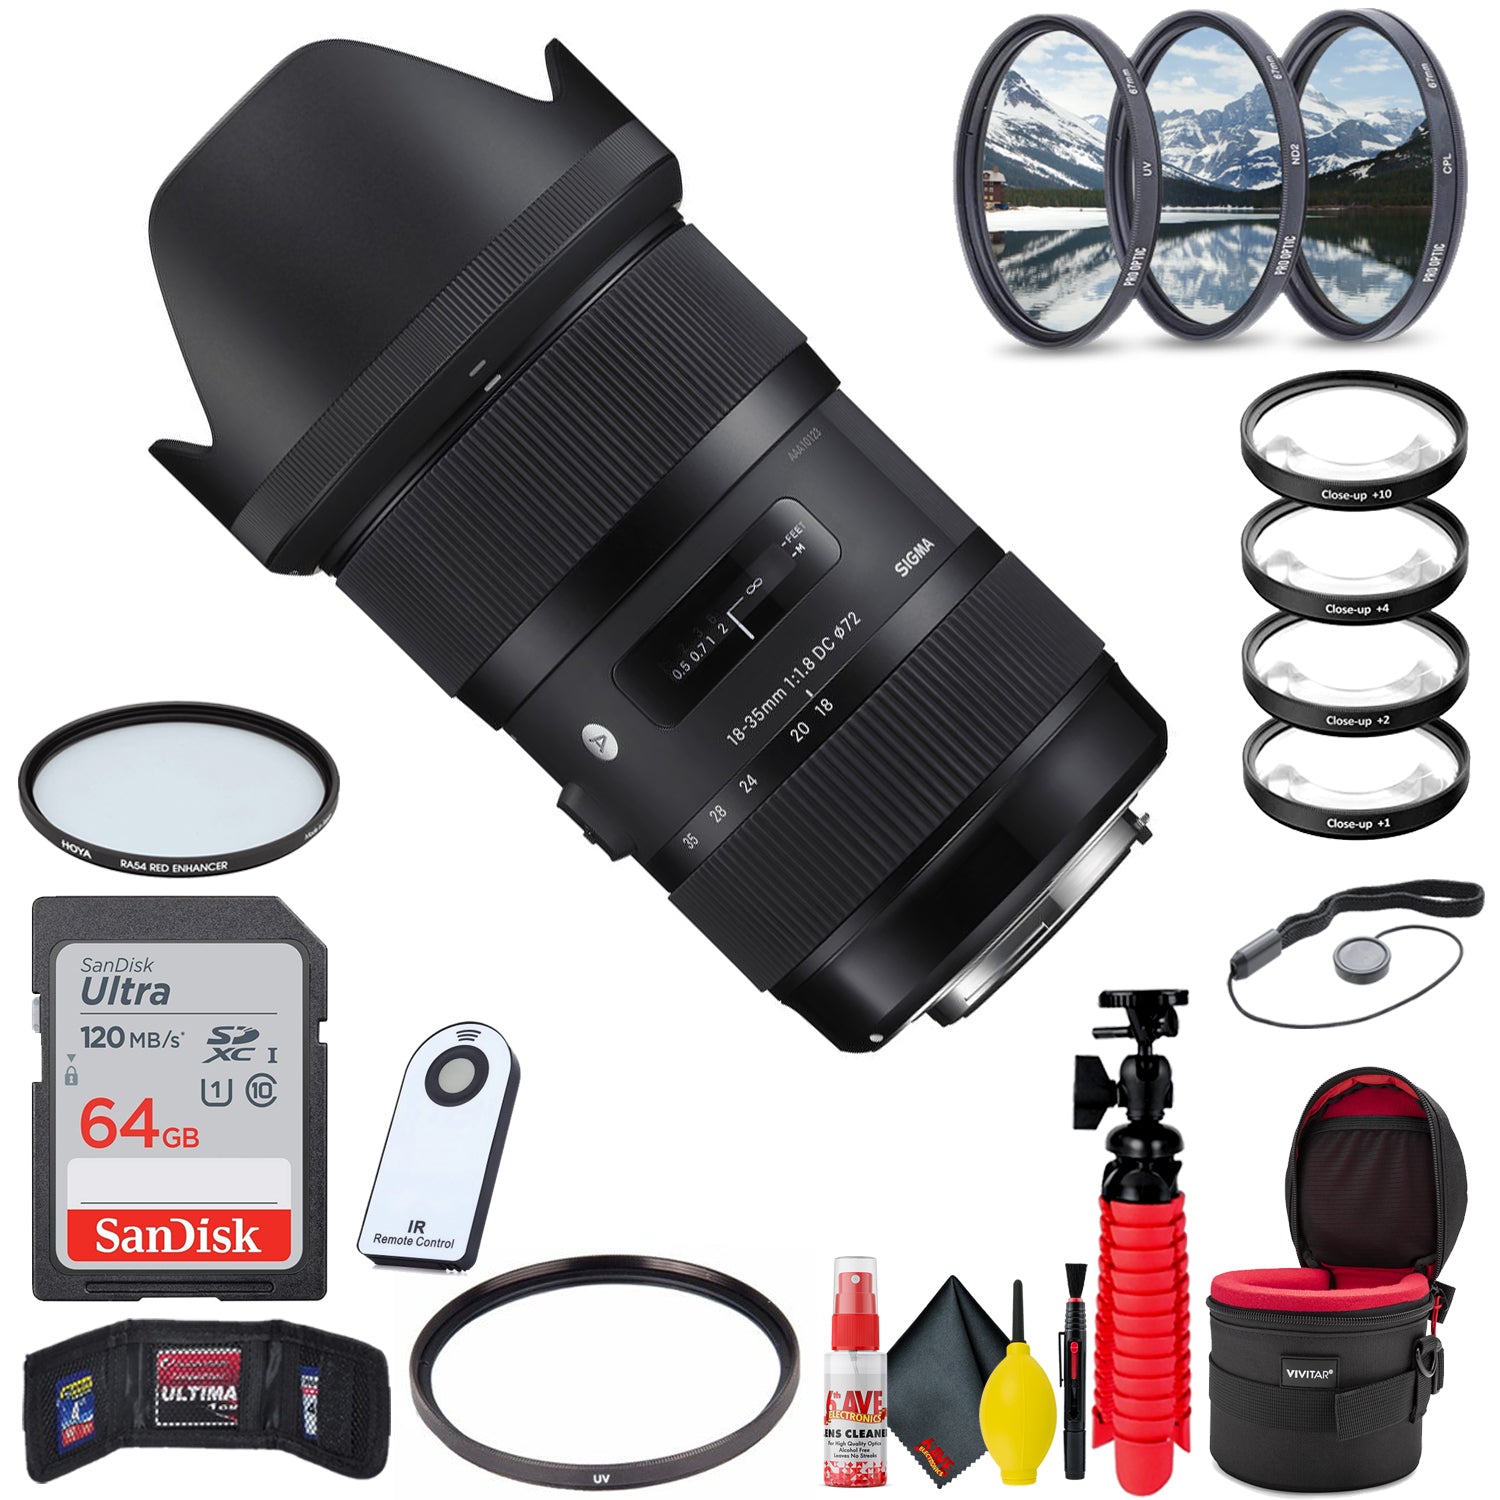 Sigma 18-35mm f/1.8 DC HSM Art Lens for Nikon F (Deluxe Bundle) With Accessories